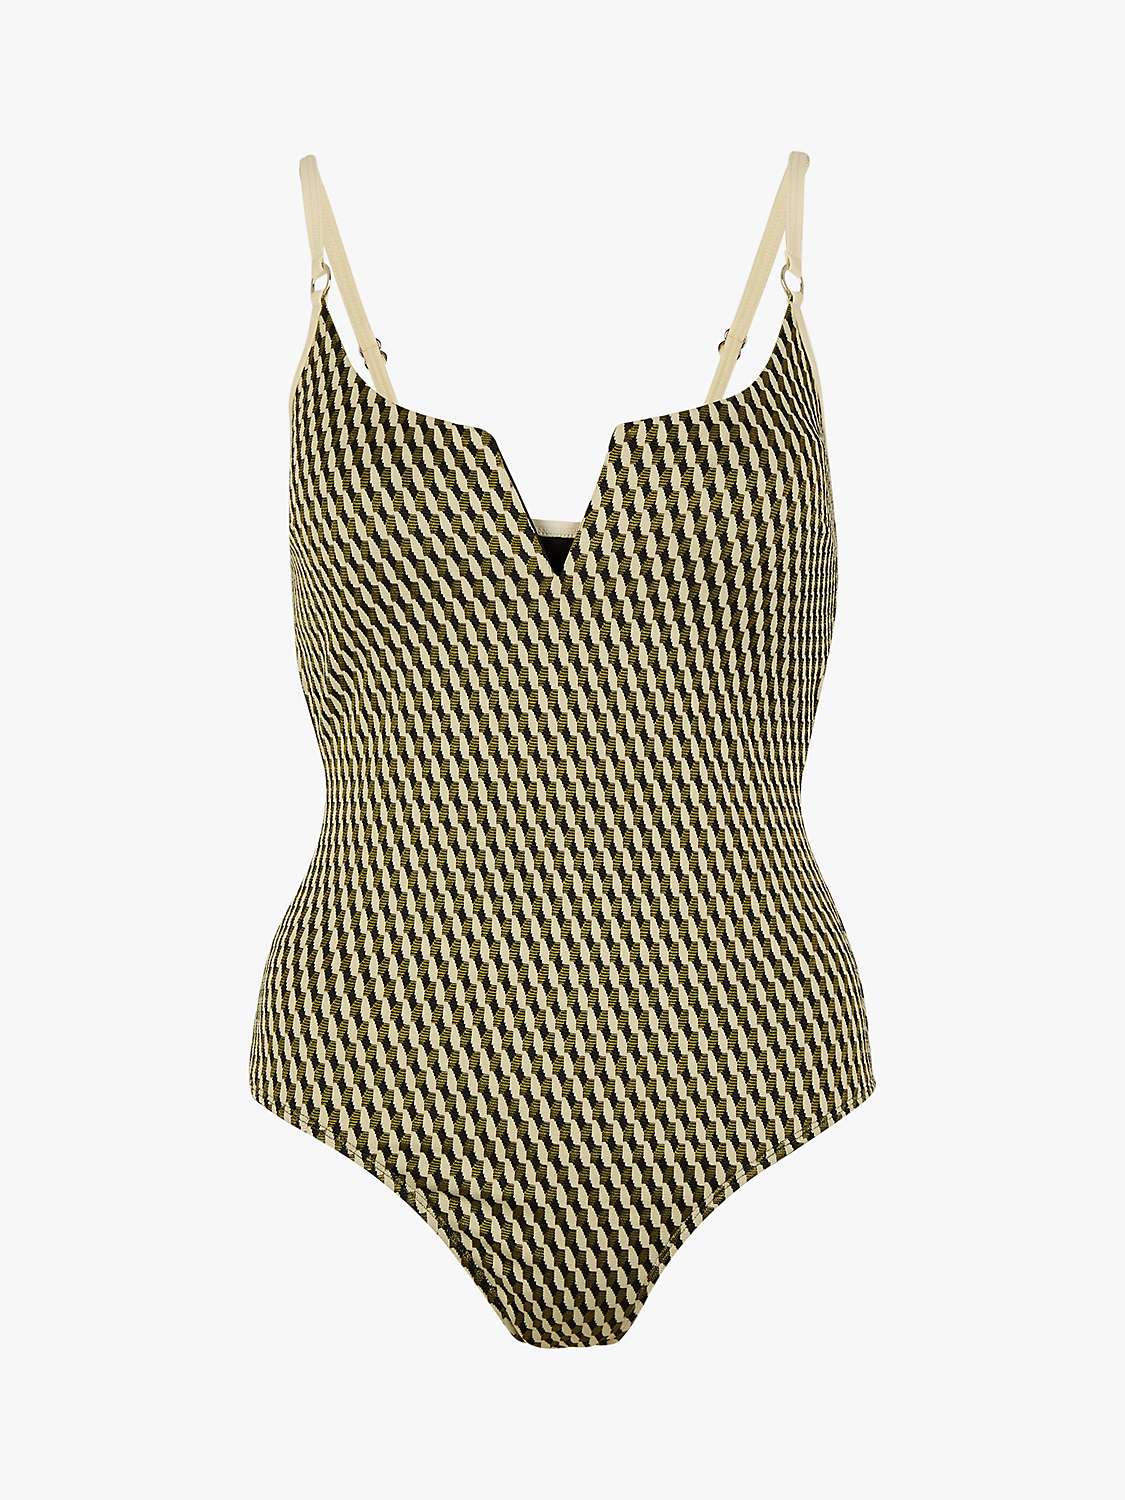 Buy Accessorize Textured Jacquard Swimsuit, Multi Online at johnlewis.com